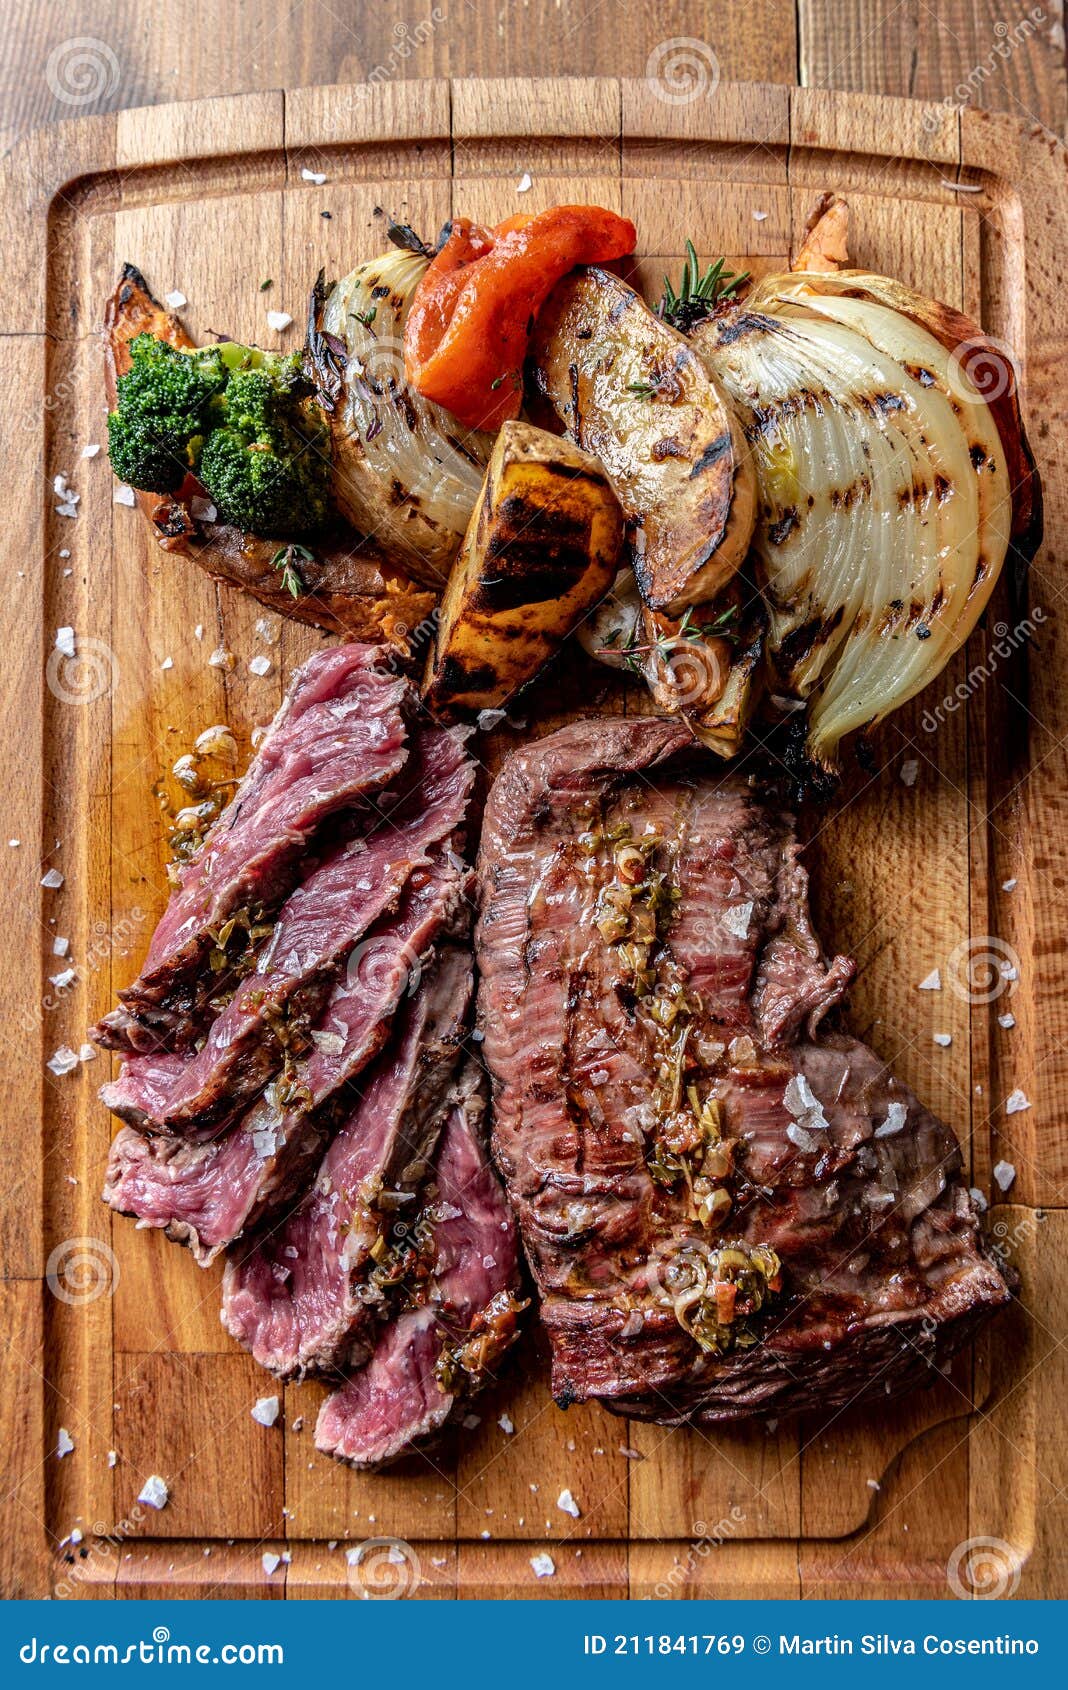 argentine cut of meat called vacio with chorizos and chimichurri